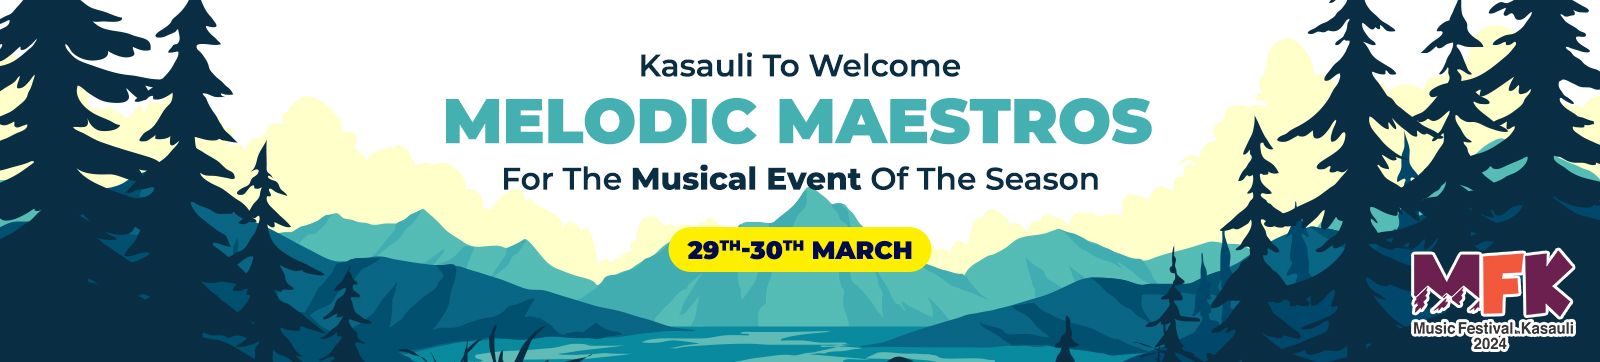 Kasauli To Welcome Melodic Maestros For The Musical Event Of The Season